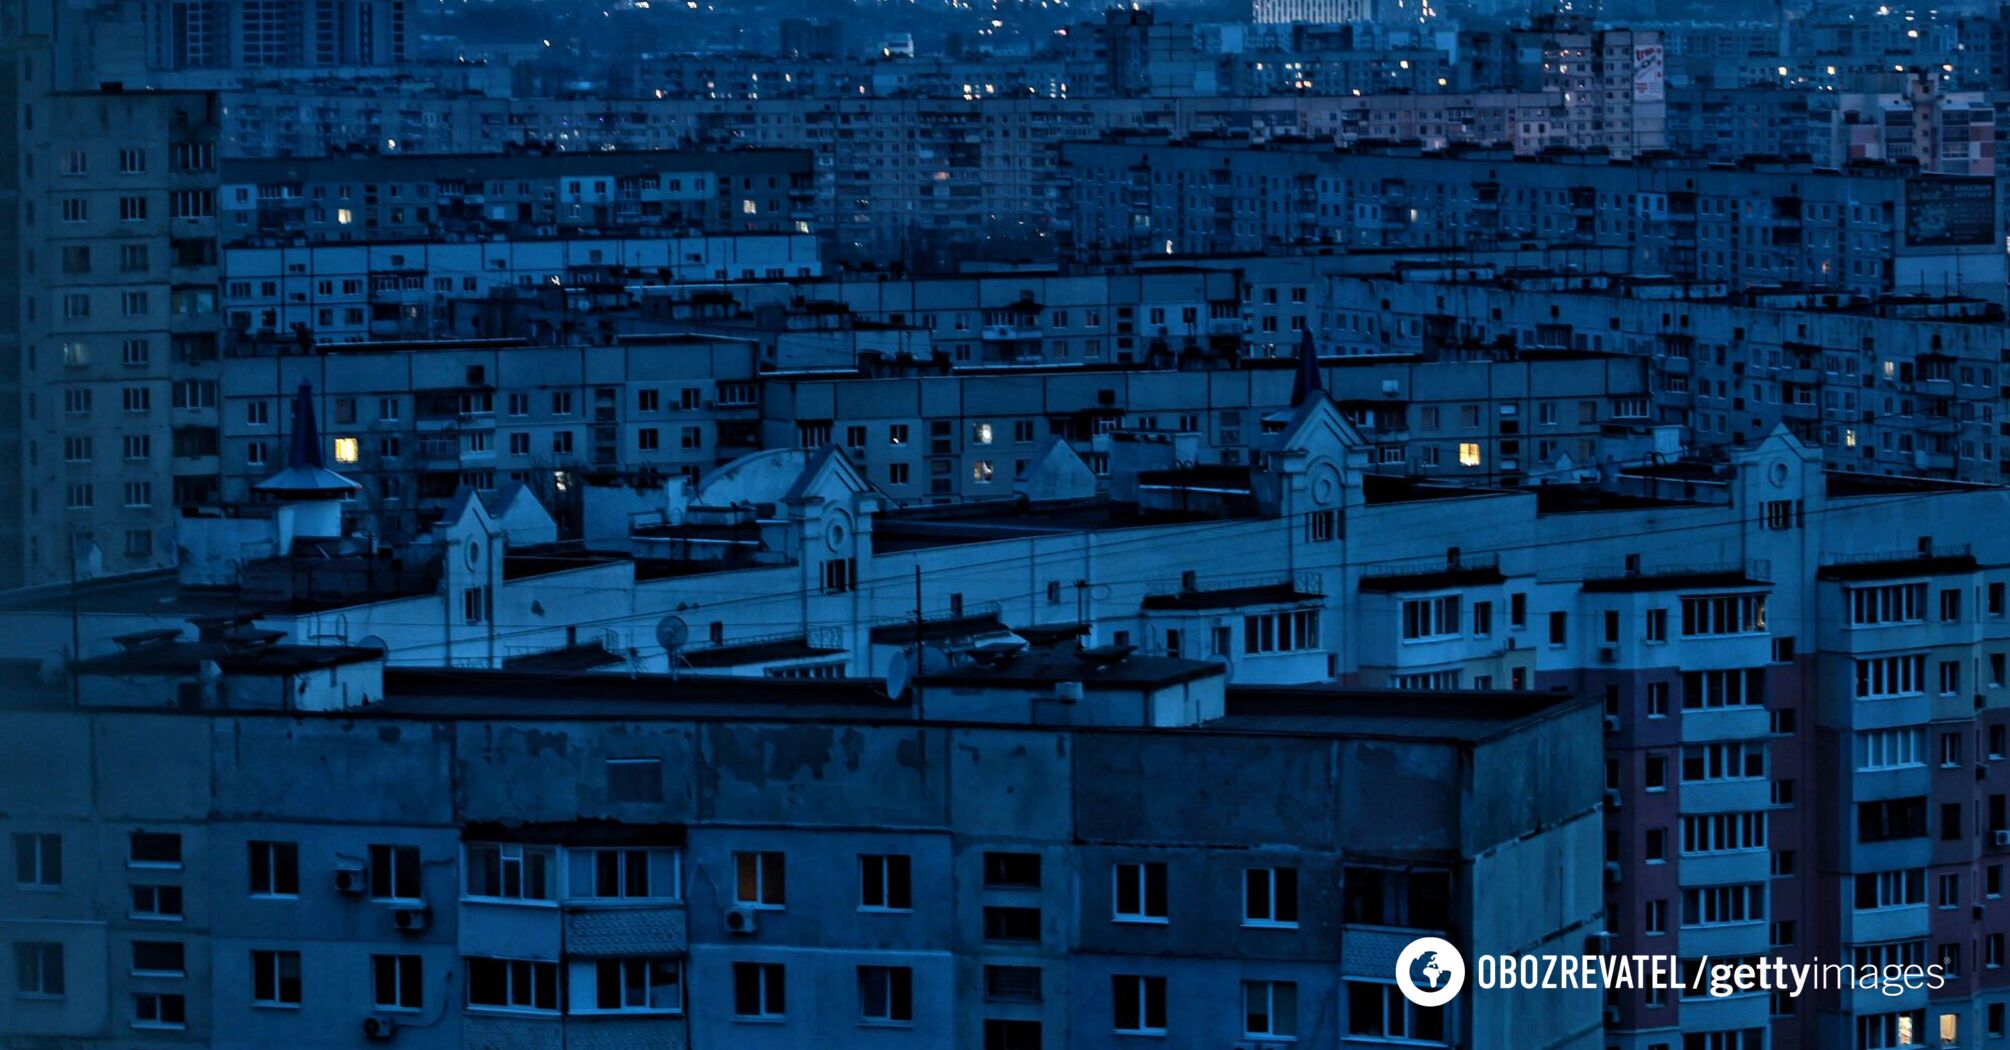 Ukraine is not facing a total blackout